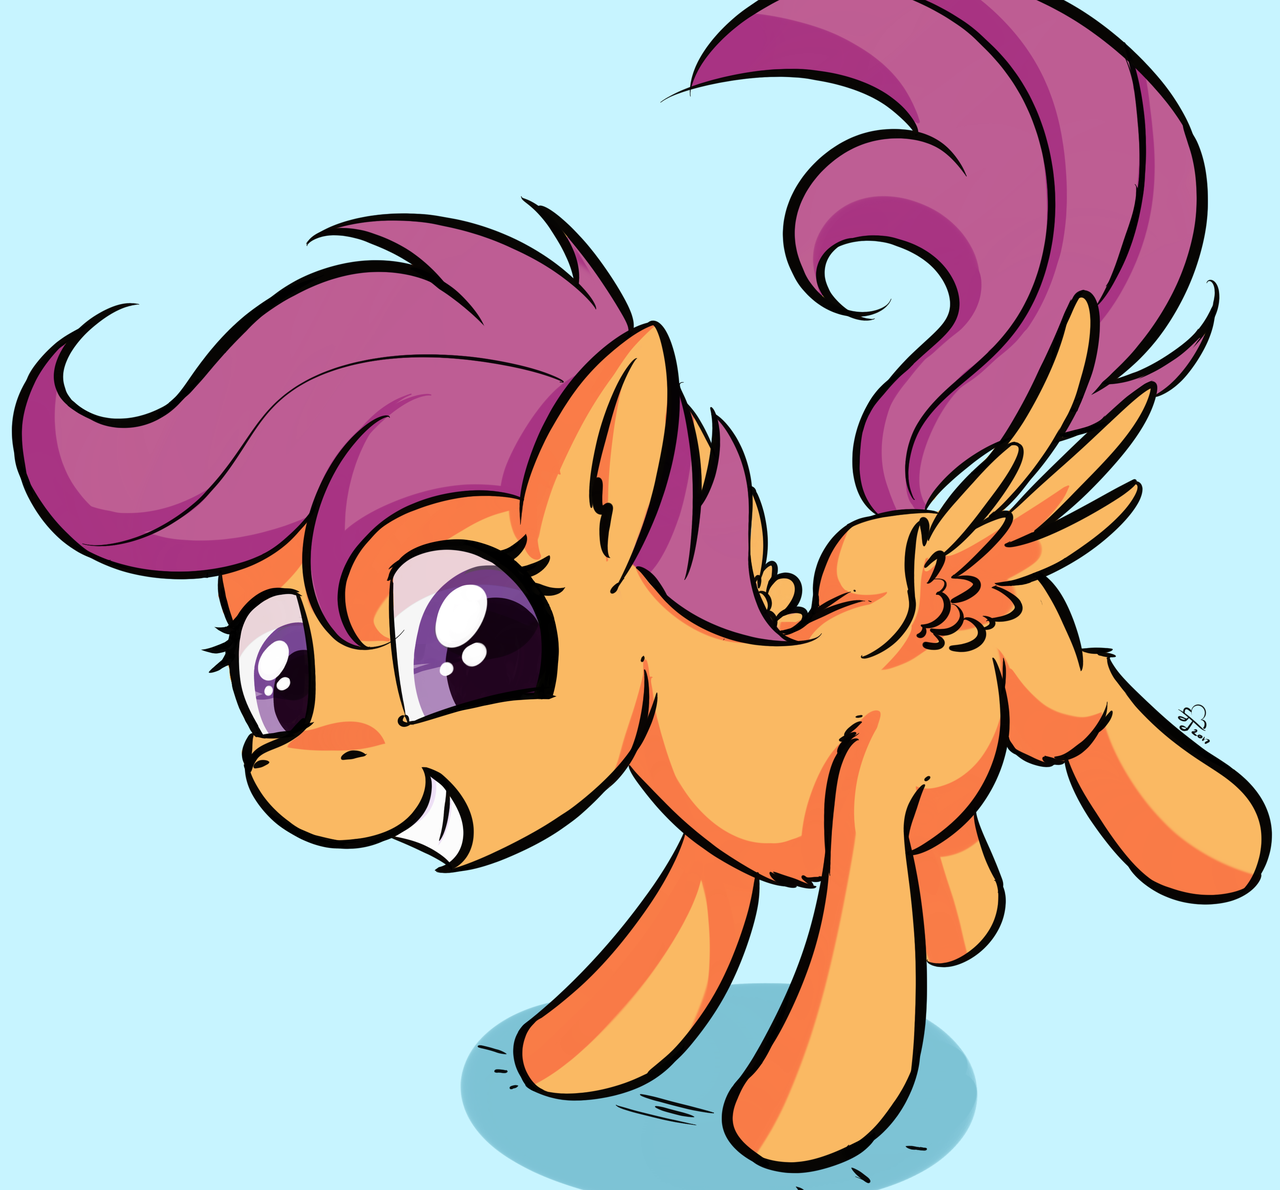 1407744__safe_artist-colon-replacer808_scootaloo_blank+flank_happy_solo.png